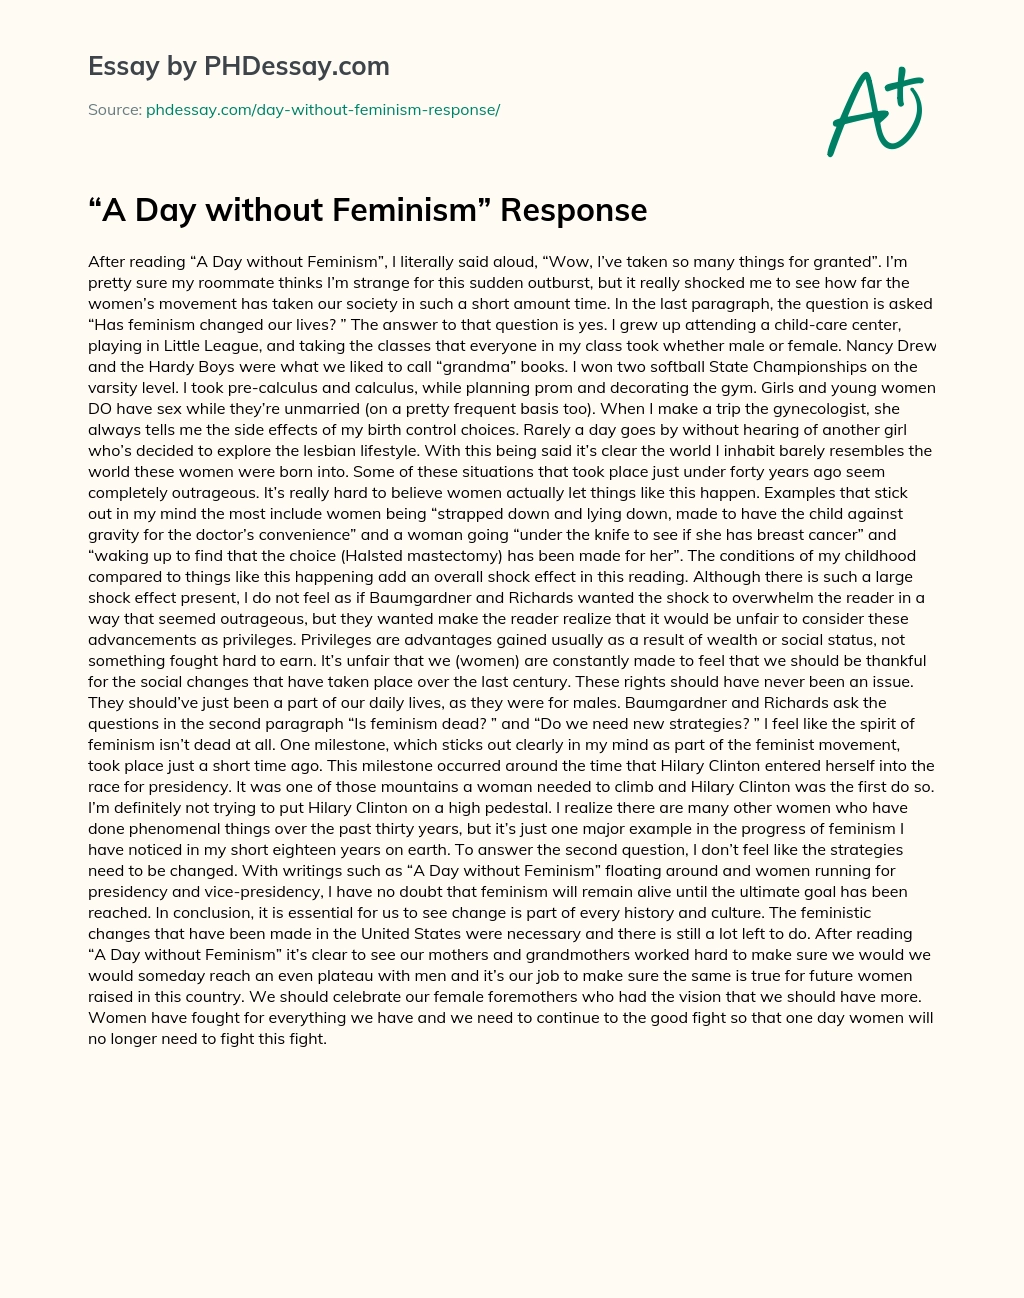 A Day without Feminism Response essay